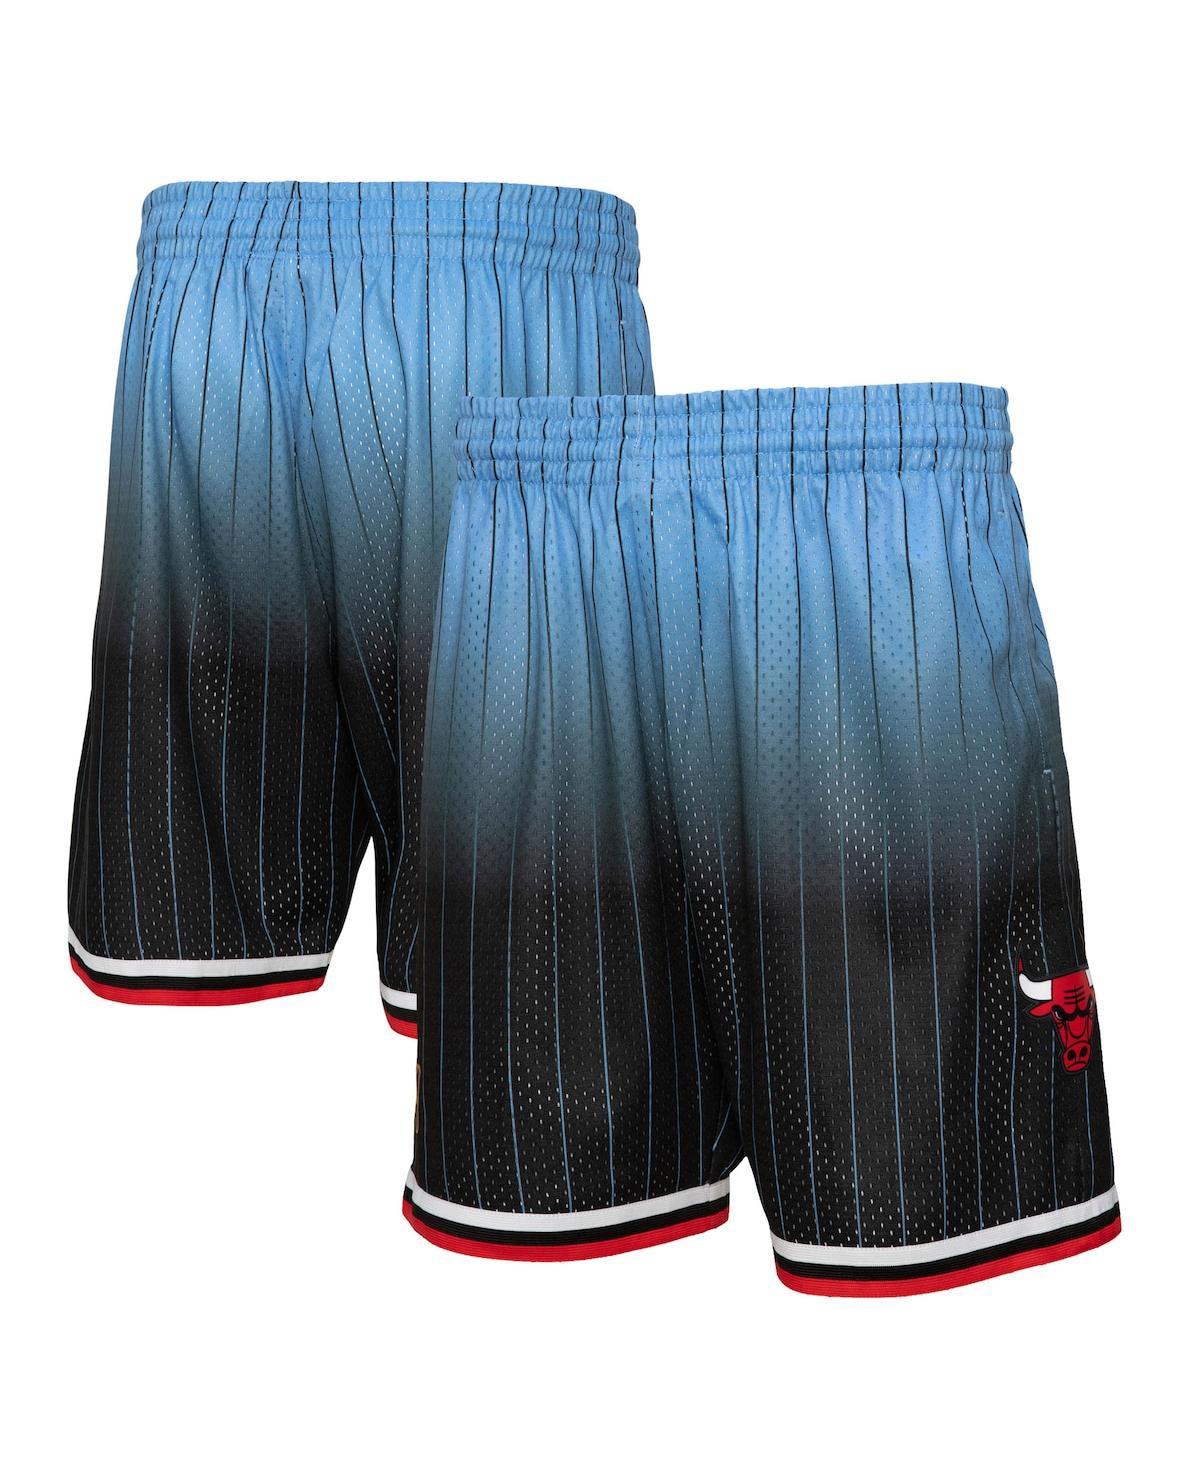 Mitchell & Ness Chicago Bulls Gold Collection Swingman Shorts for Men